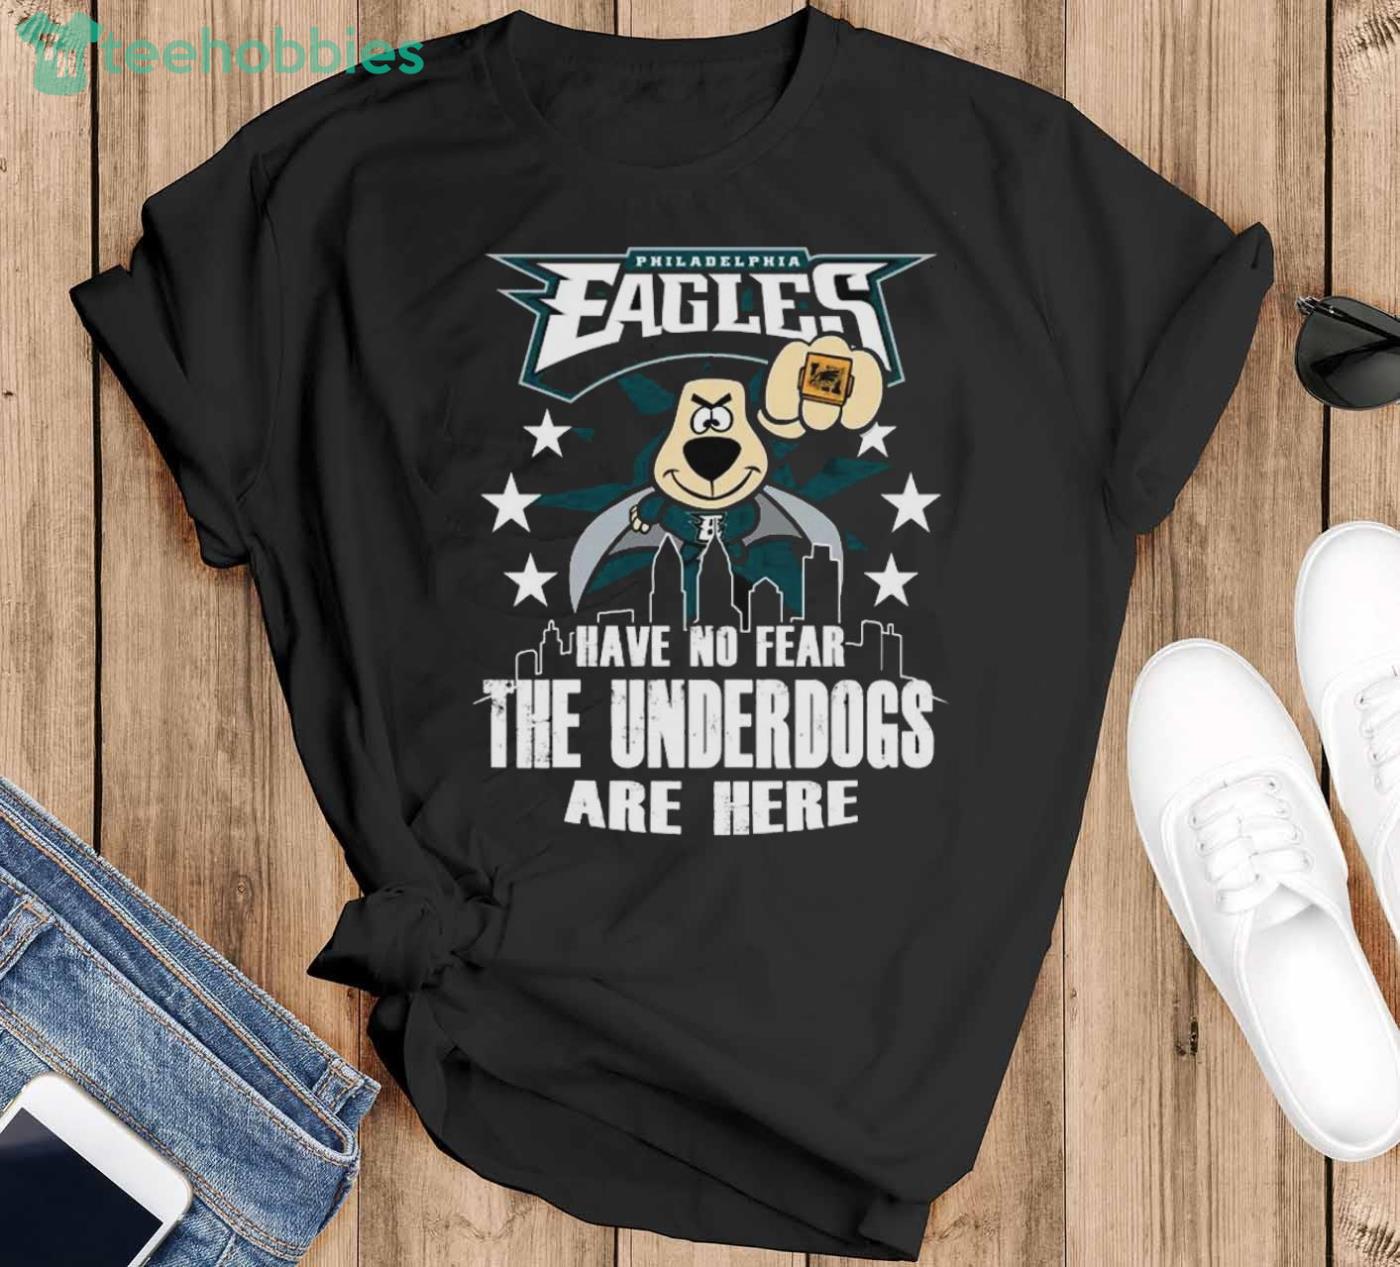 Have No Fear The Underdogs Are Here Philadelphia Eagles T-Shirt - Black T-Shirt